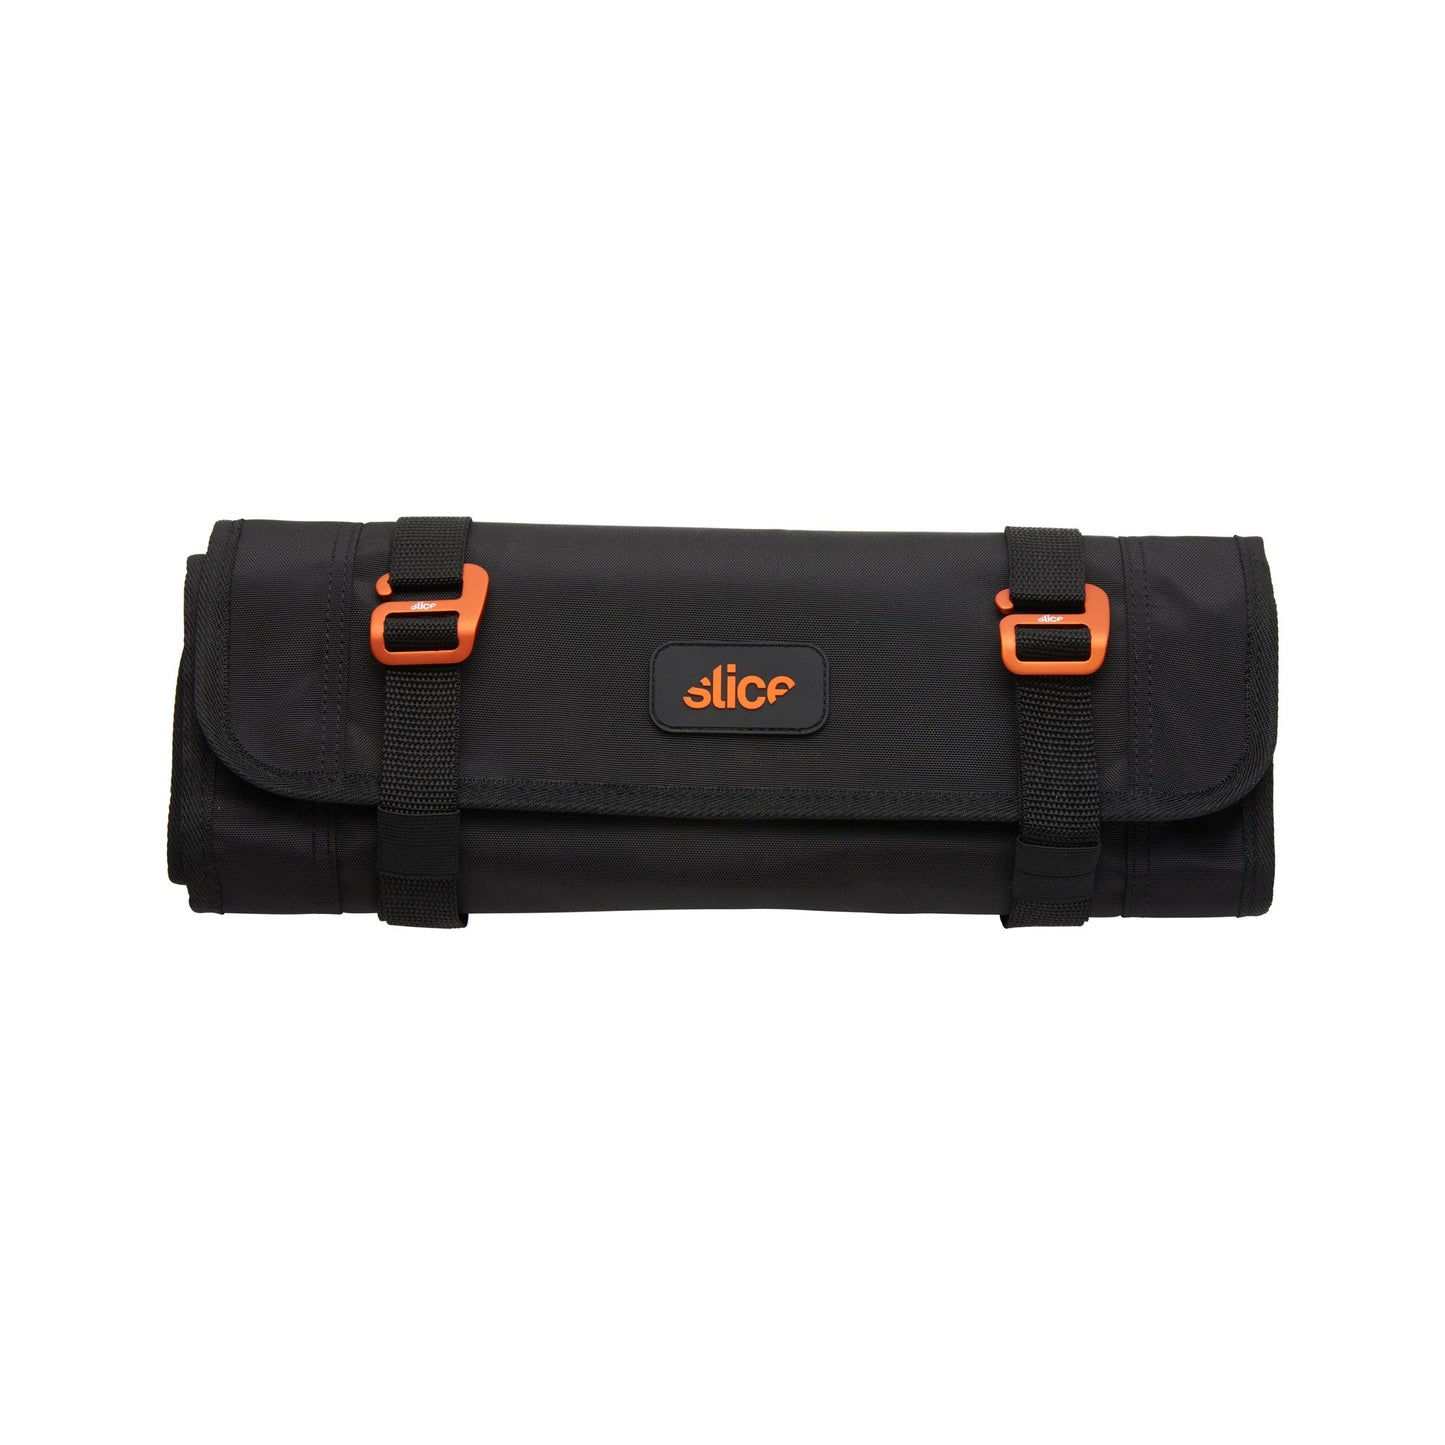 The Slice® Tool Roll-Up Organizer